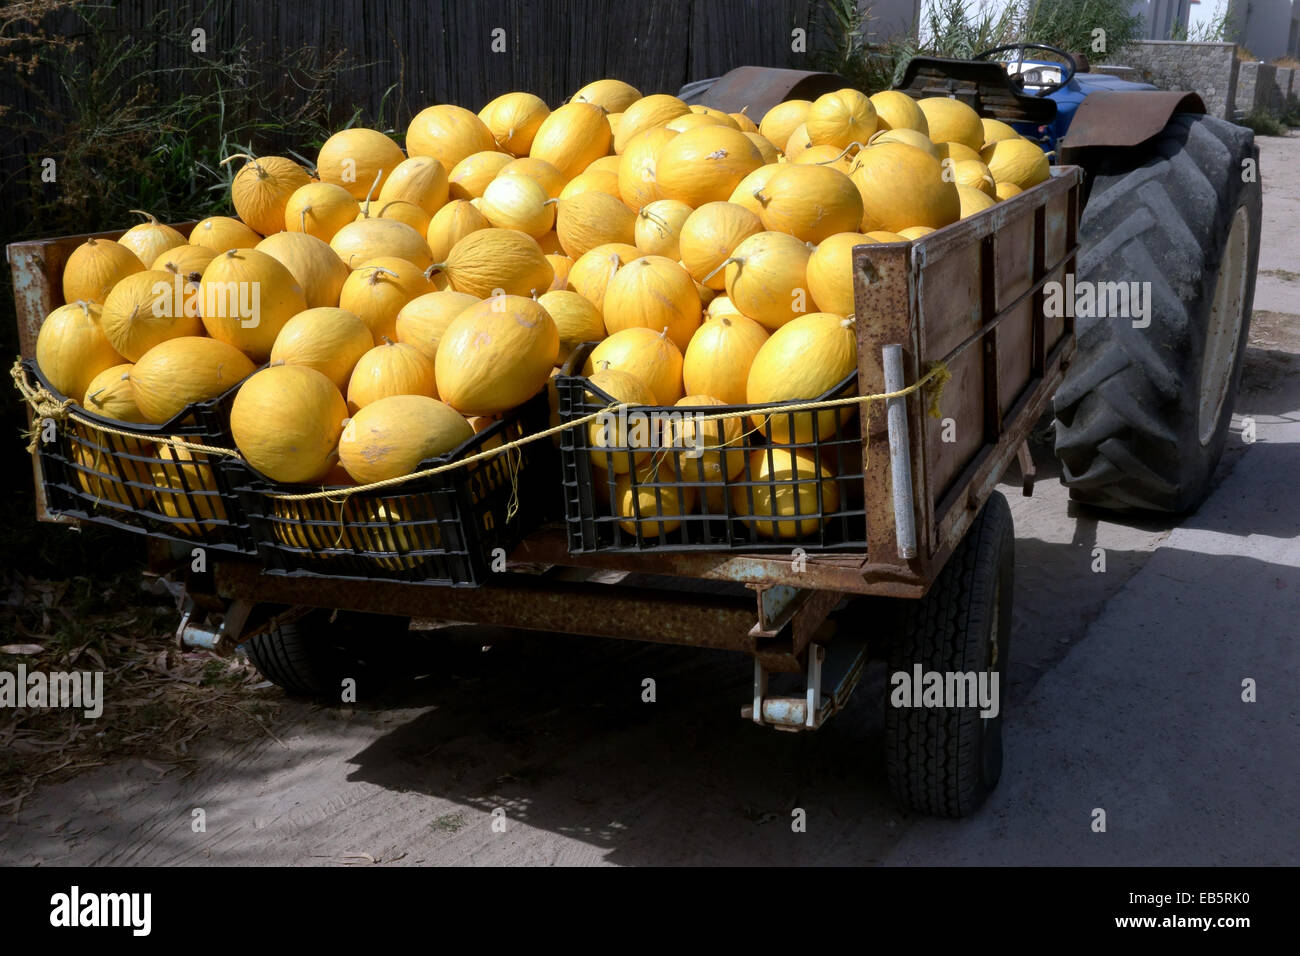 a tractor and trailer full of ripe yellow melons Stock Photo